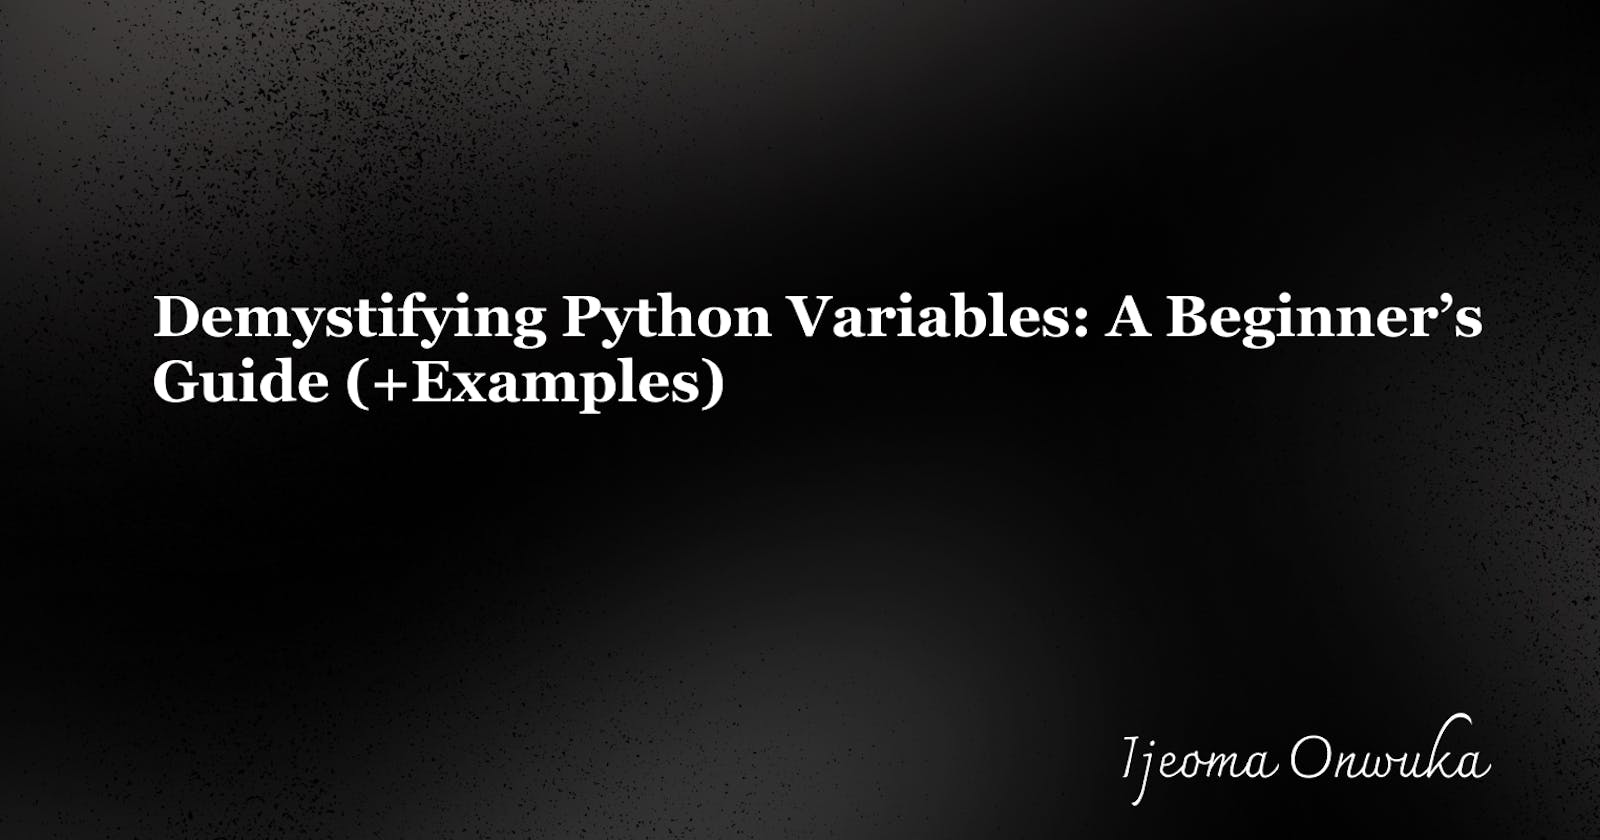 Demystifying Python Variables: A Beginner's Guide (+Examples)